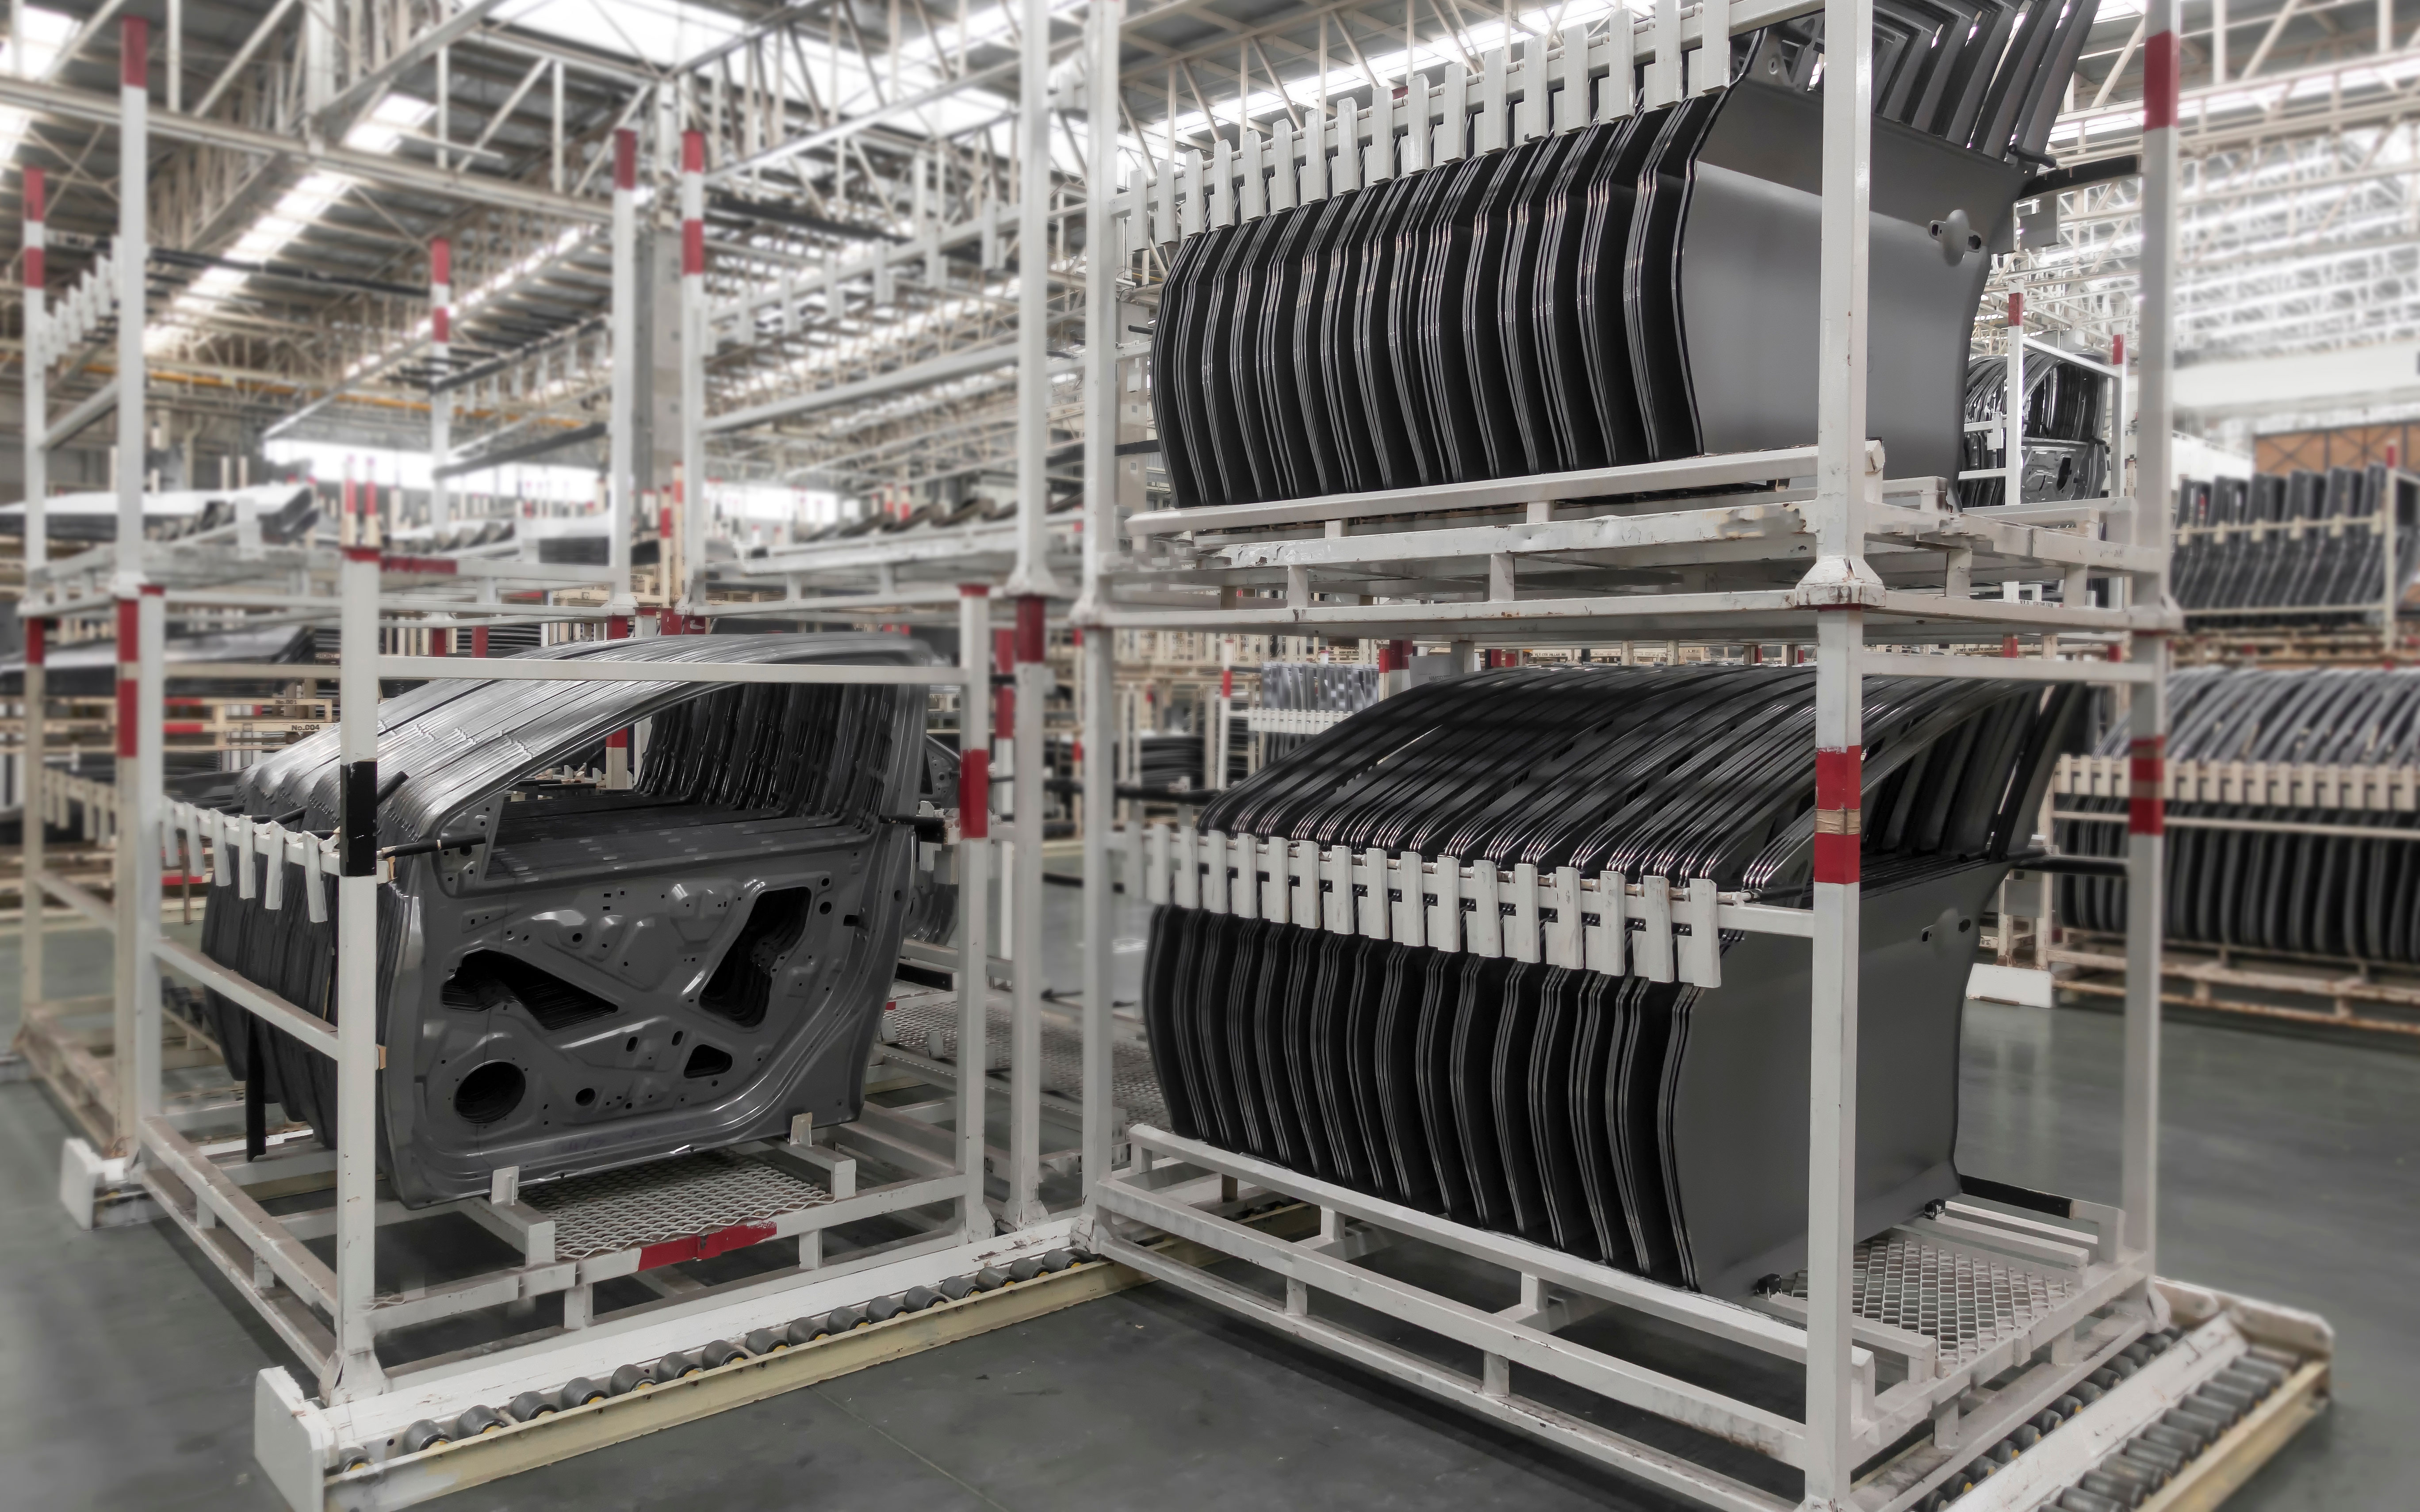 Storage of components in the automotive industry